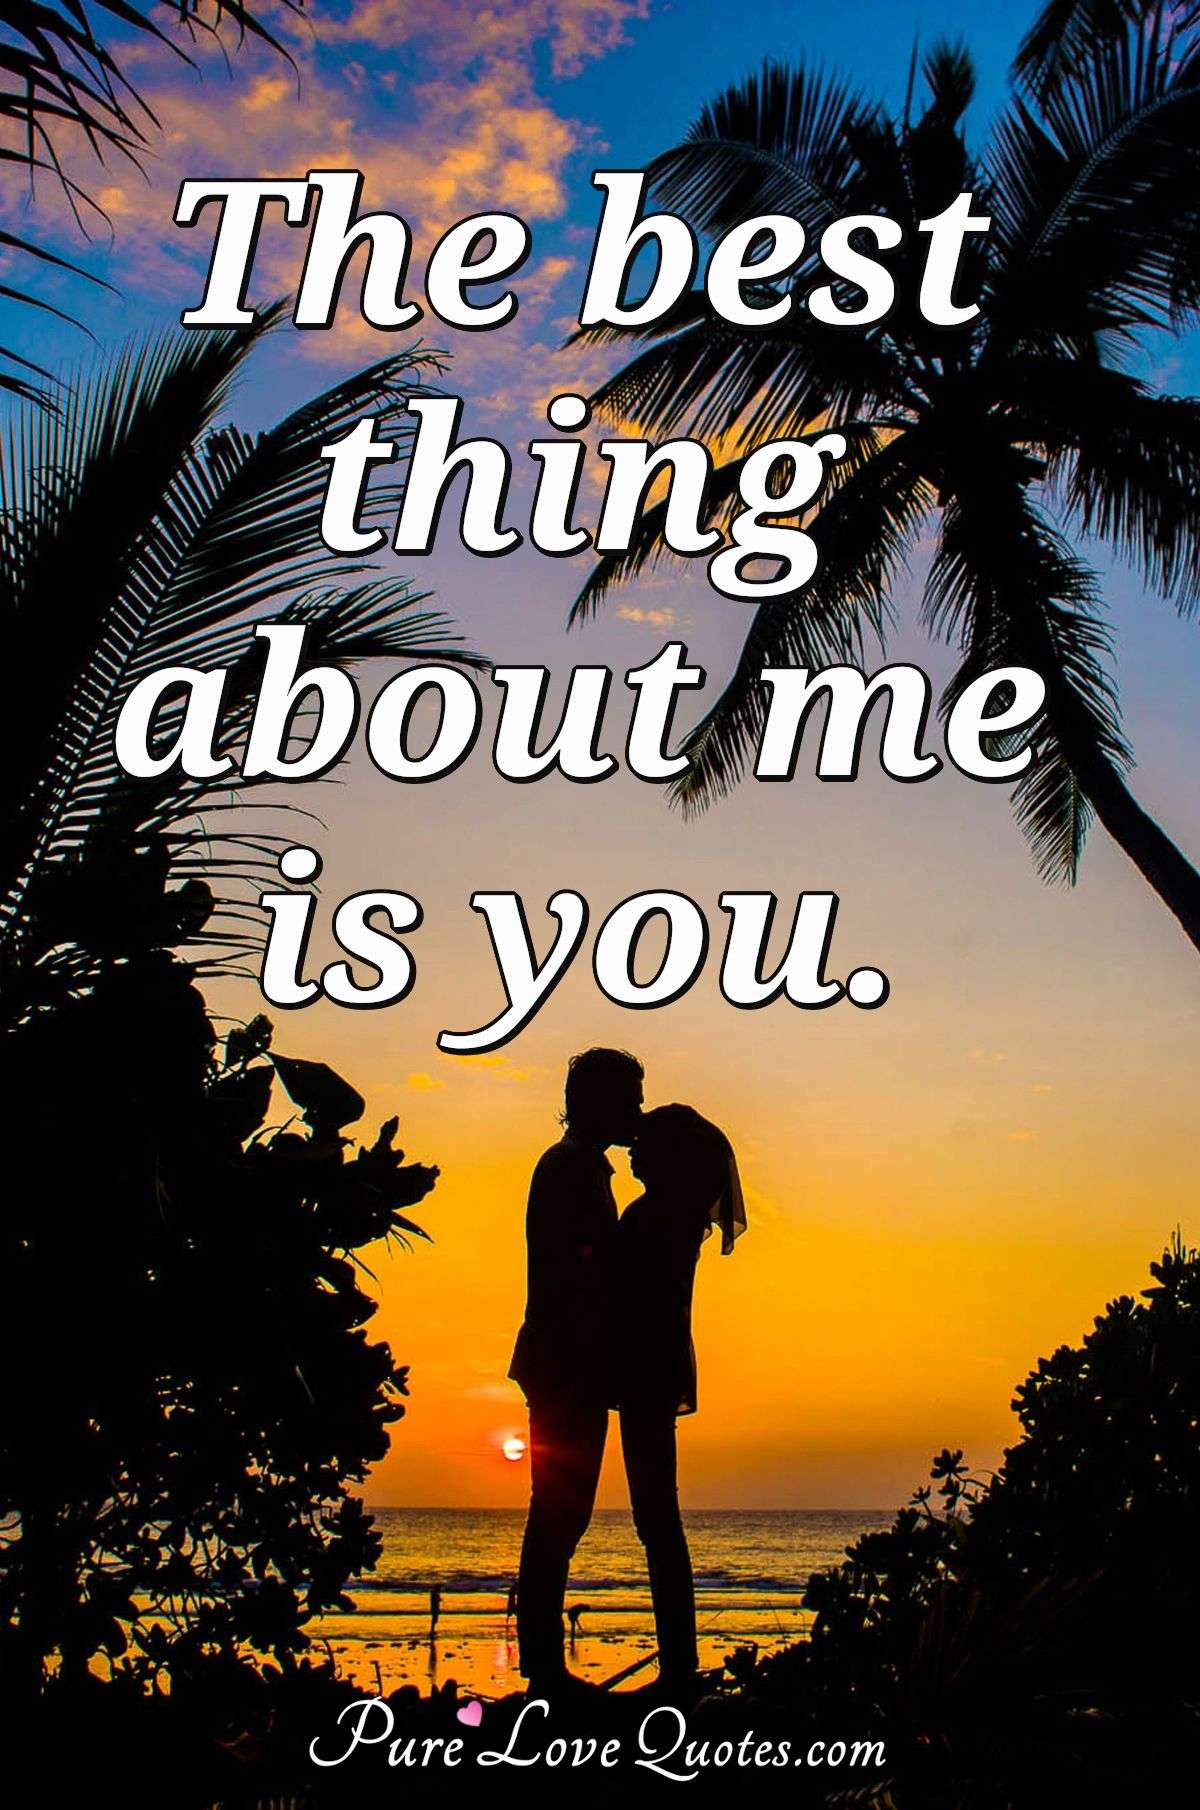 The best thing about me is you. - Anonymous